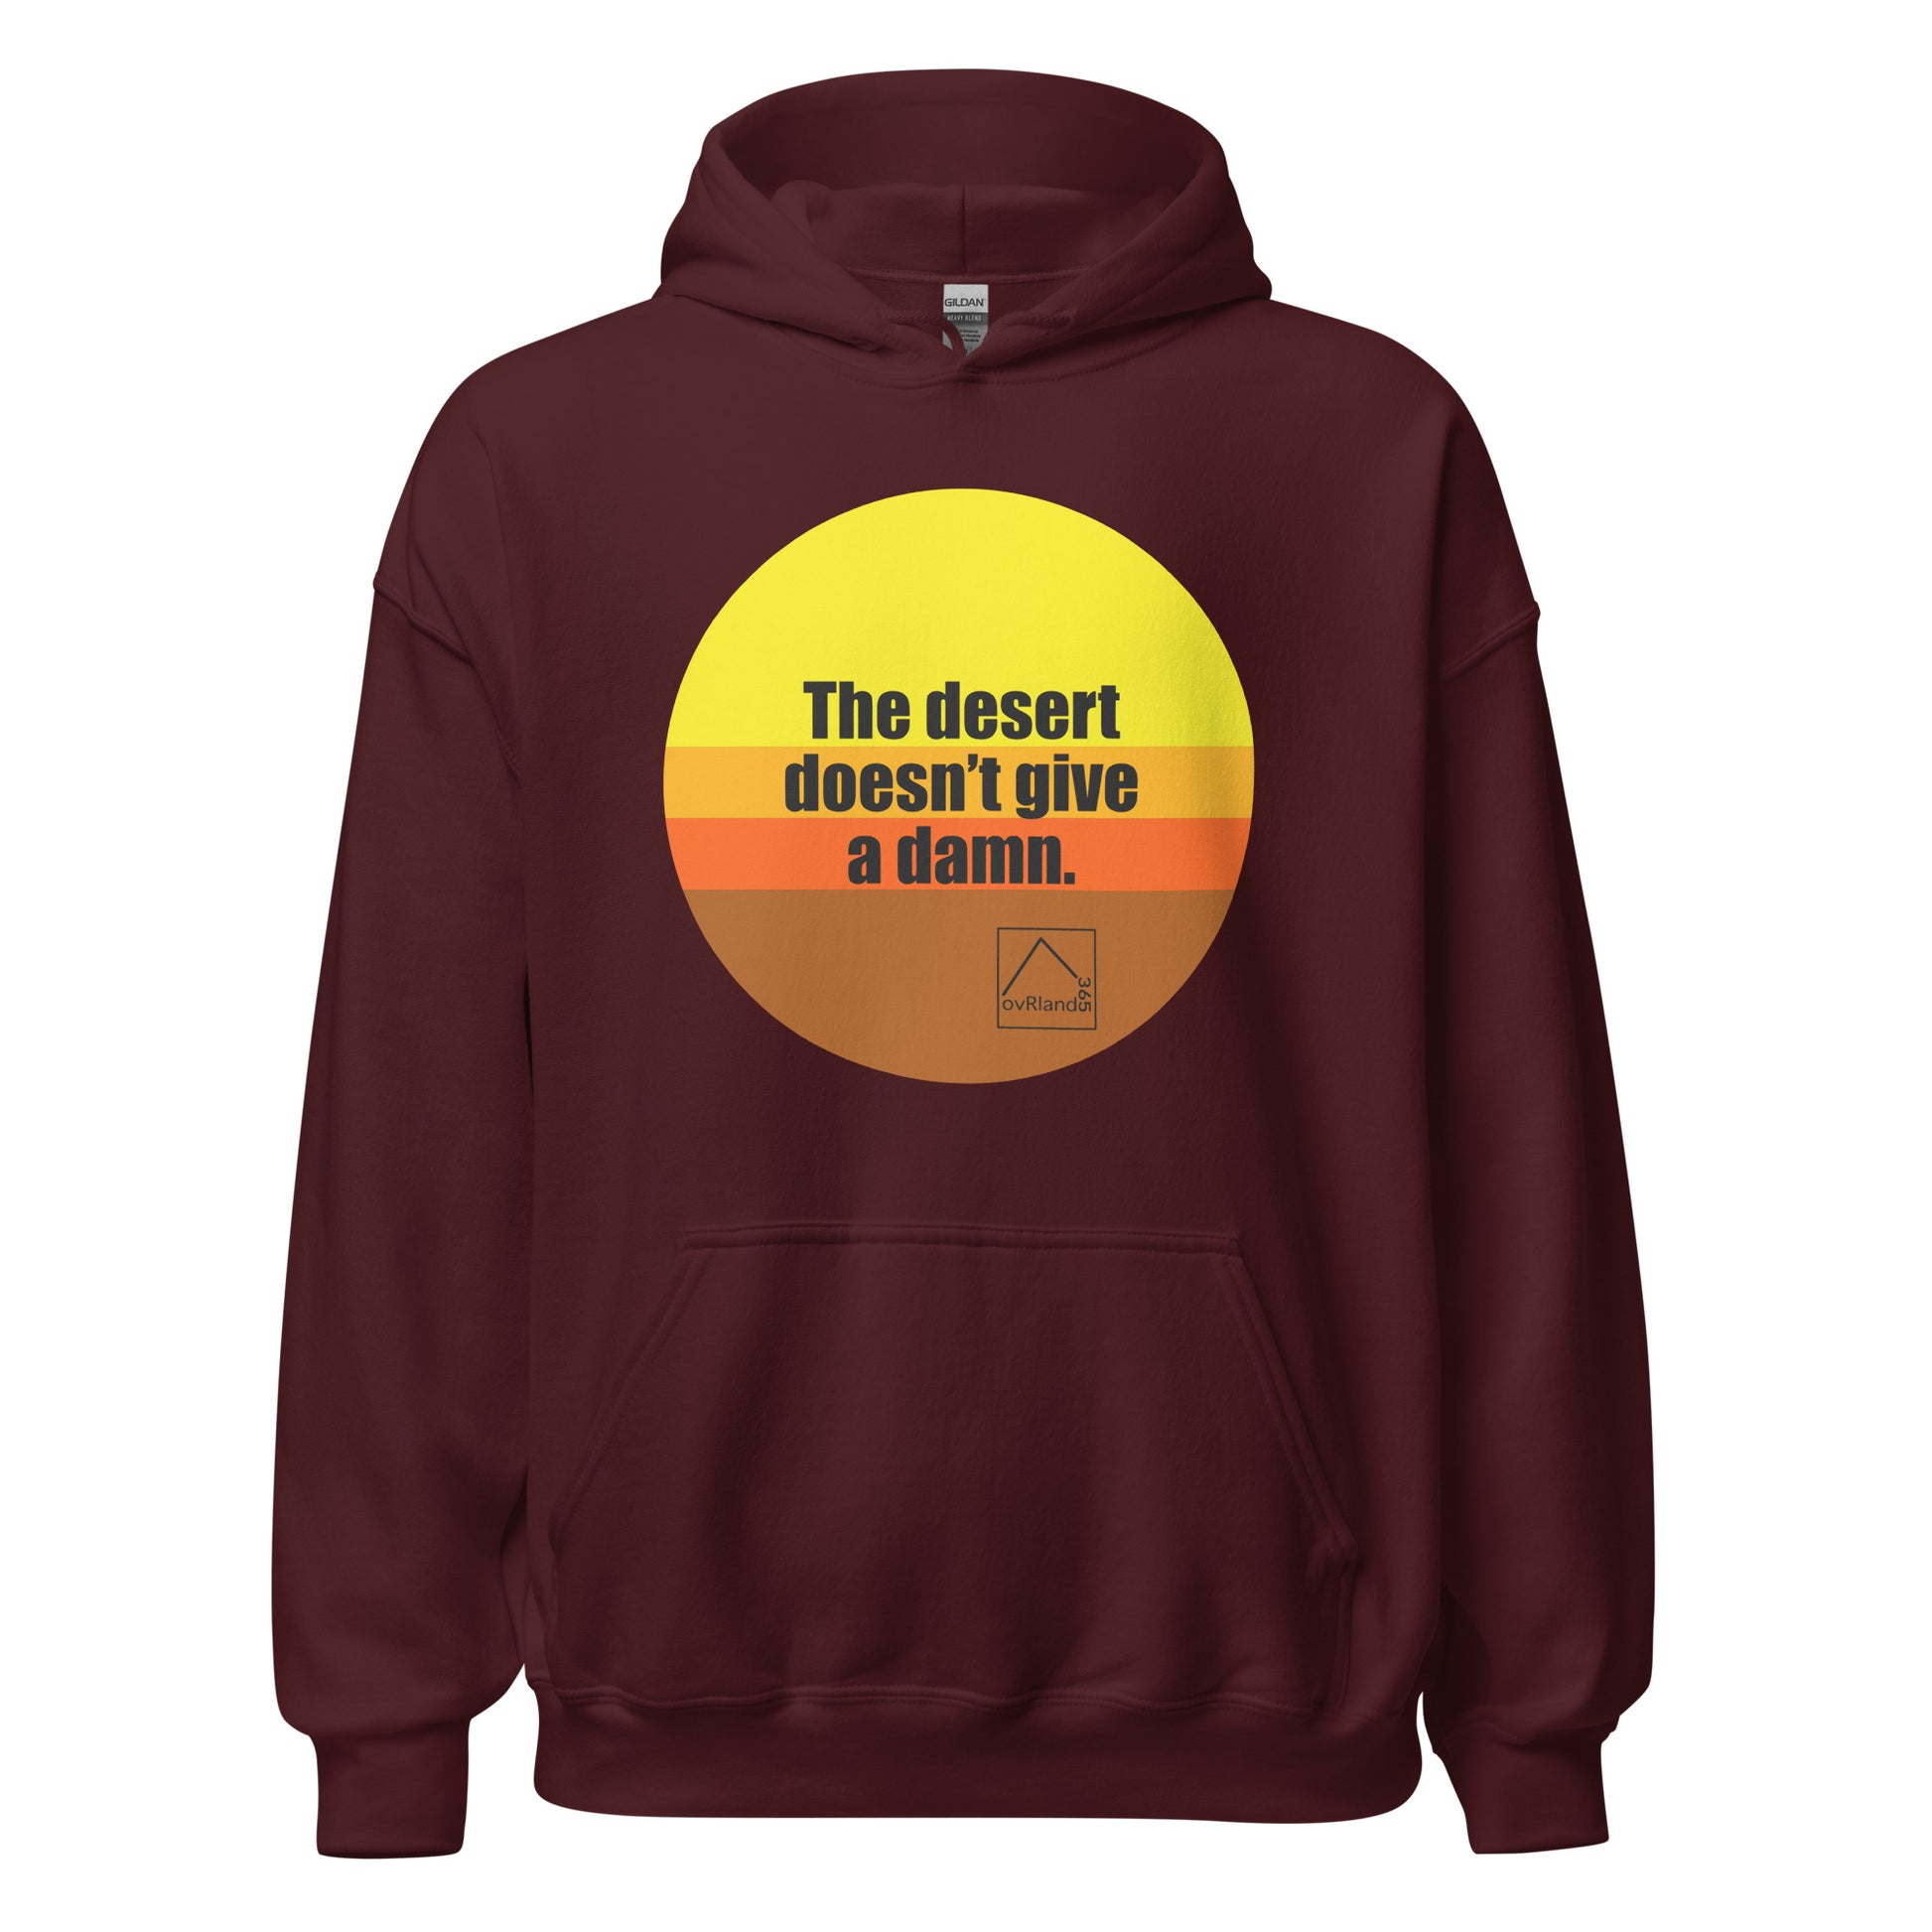 The desert doesn't give a damn. Maroon hoodie. overland365.com